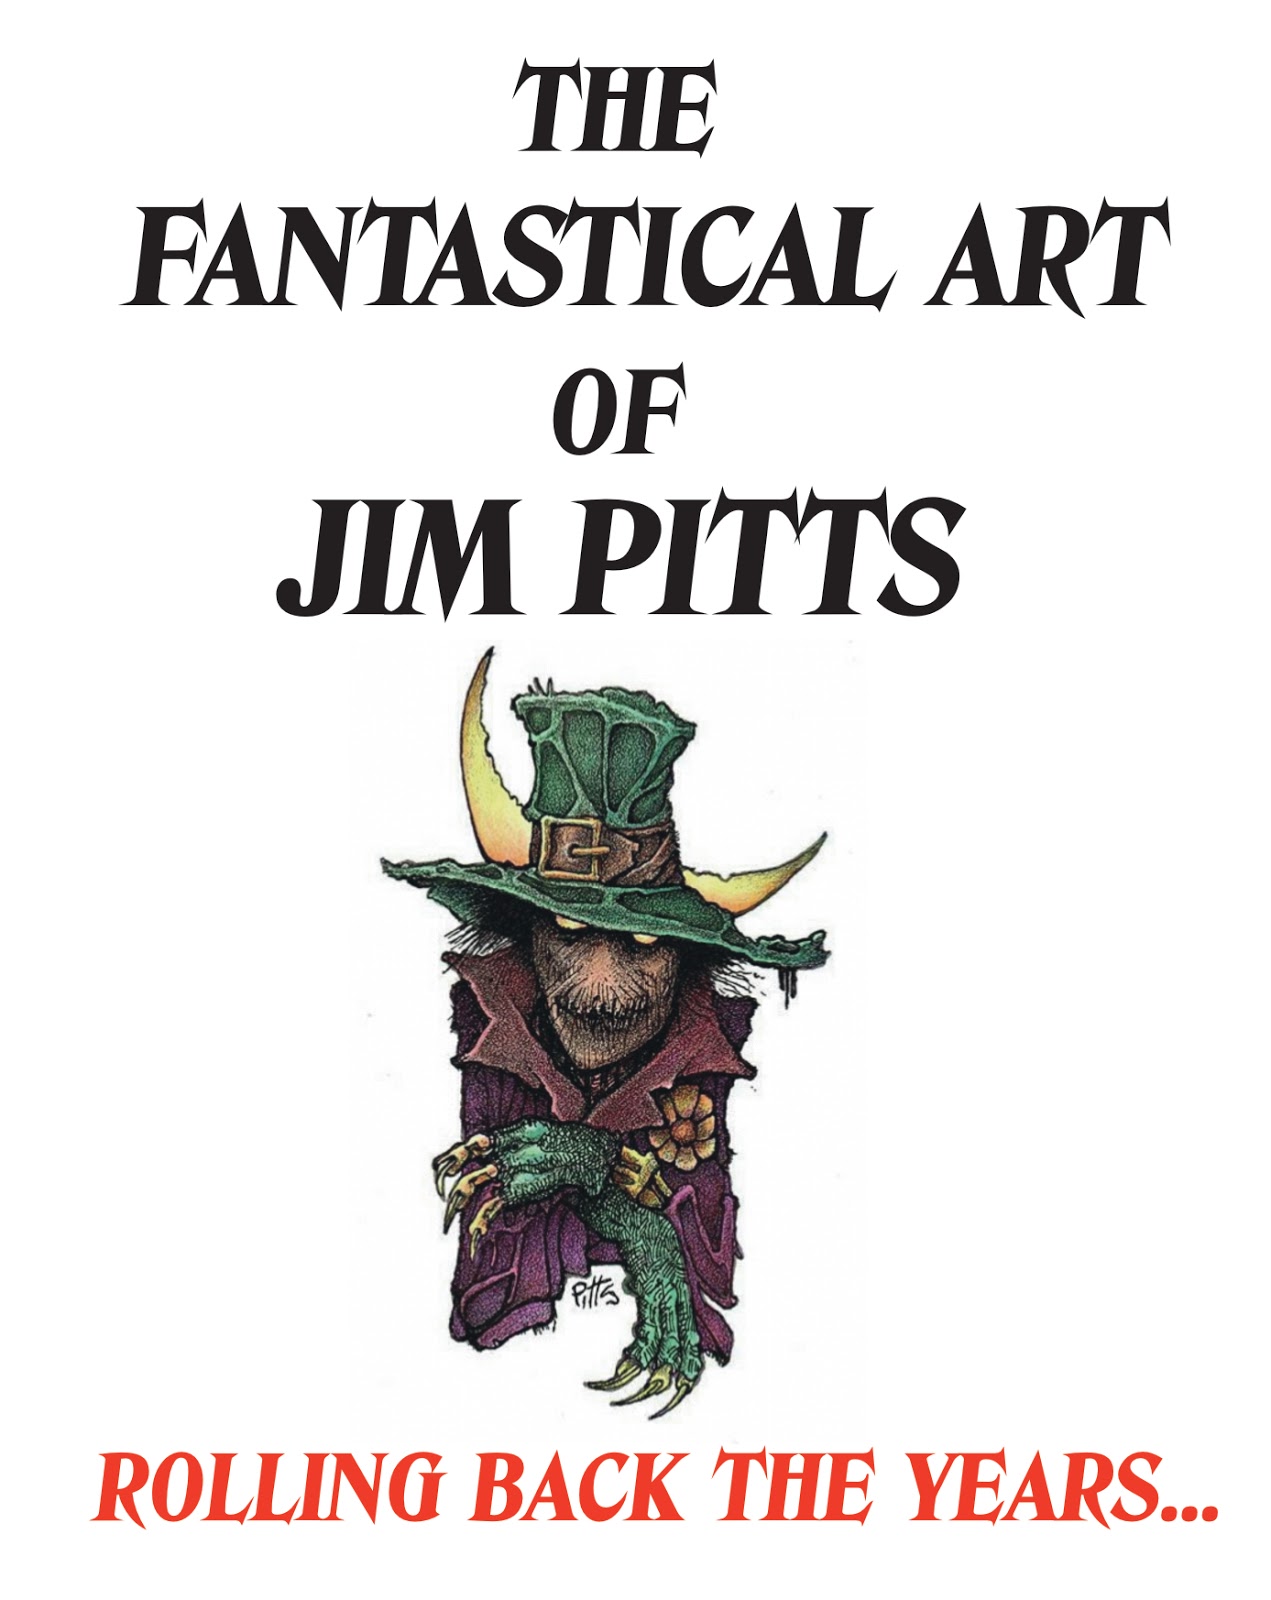 The Fantastical Art of Jim Pitts